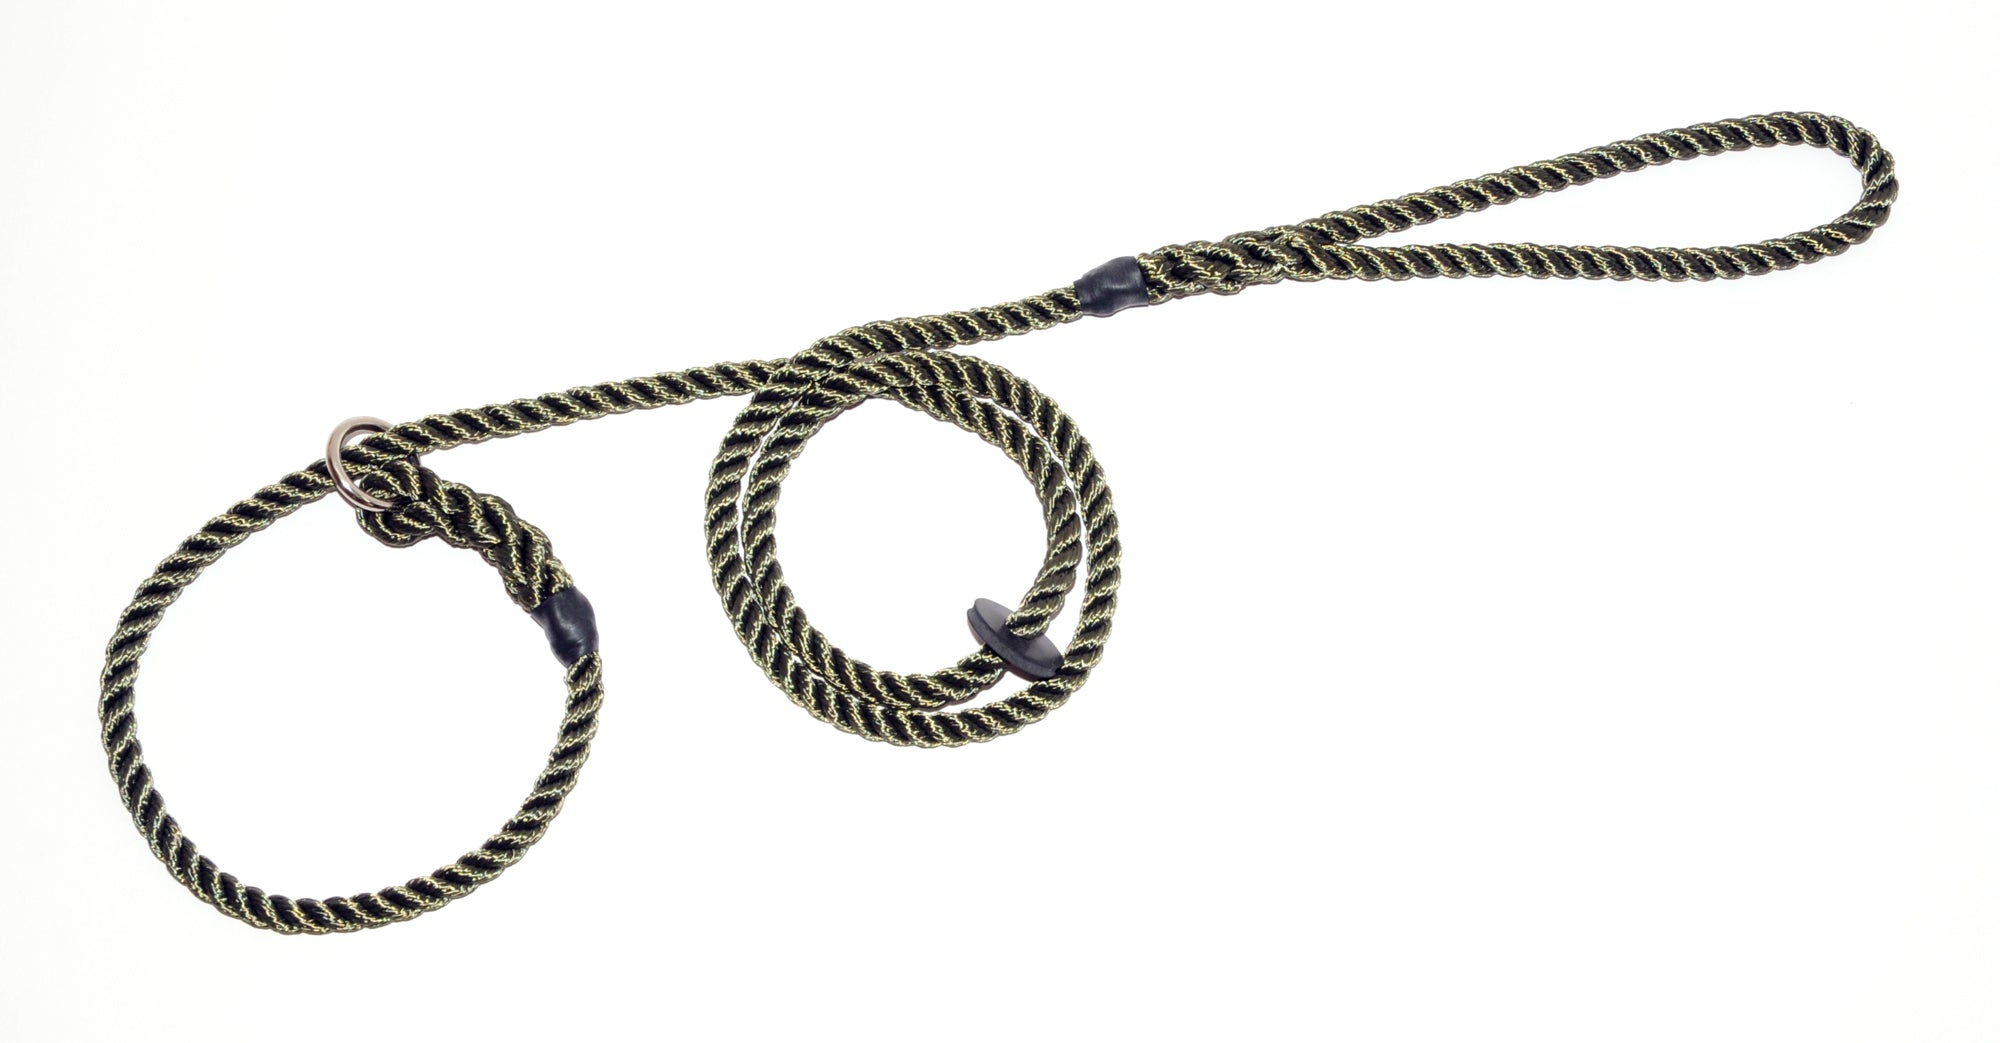 8mm Diameter Rope Slip Lead With Rubber Stop - Nickel Plated Fittings